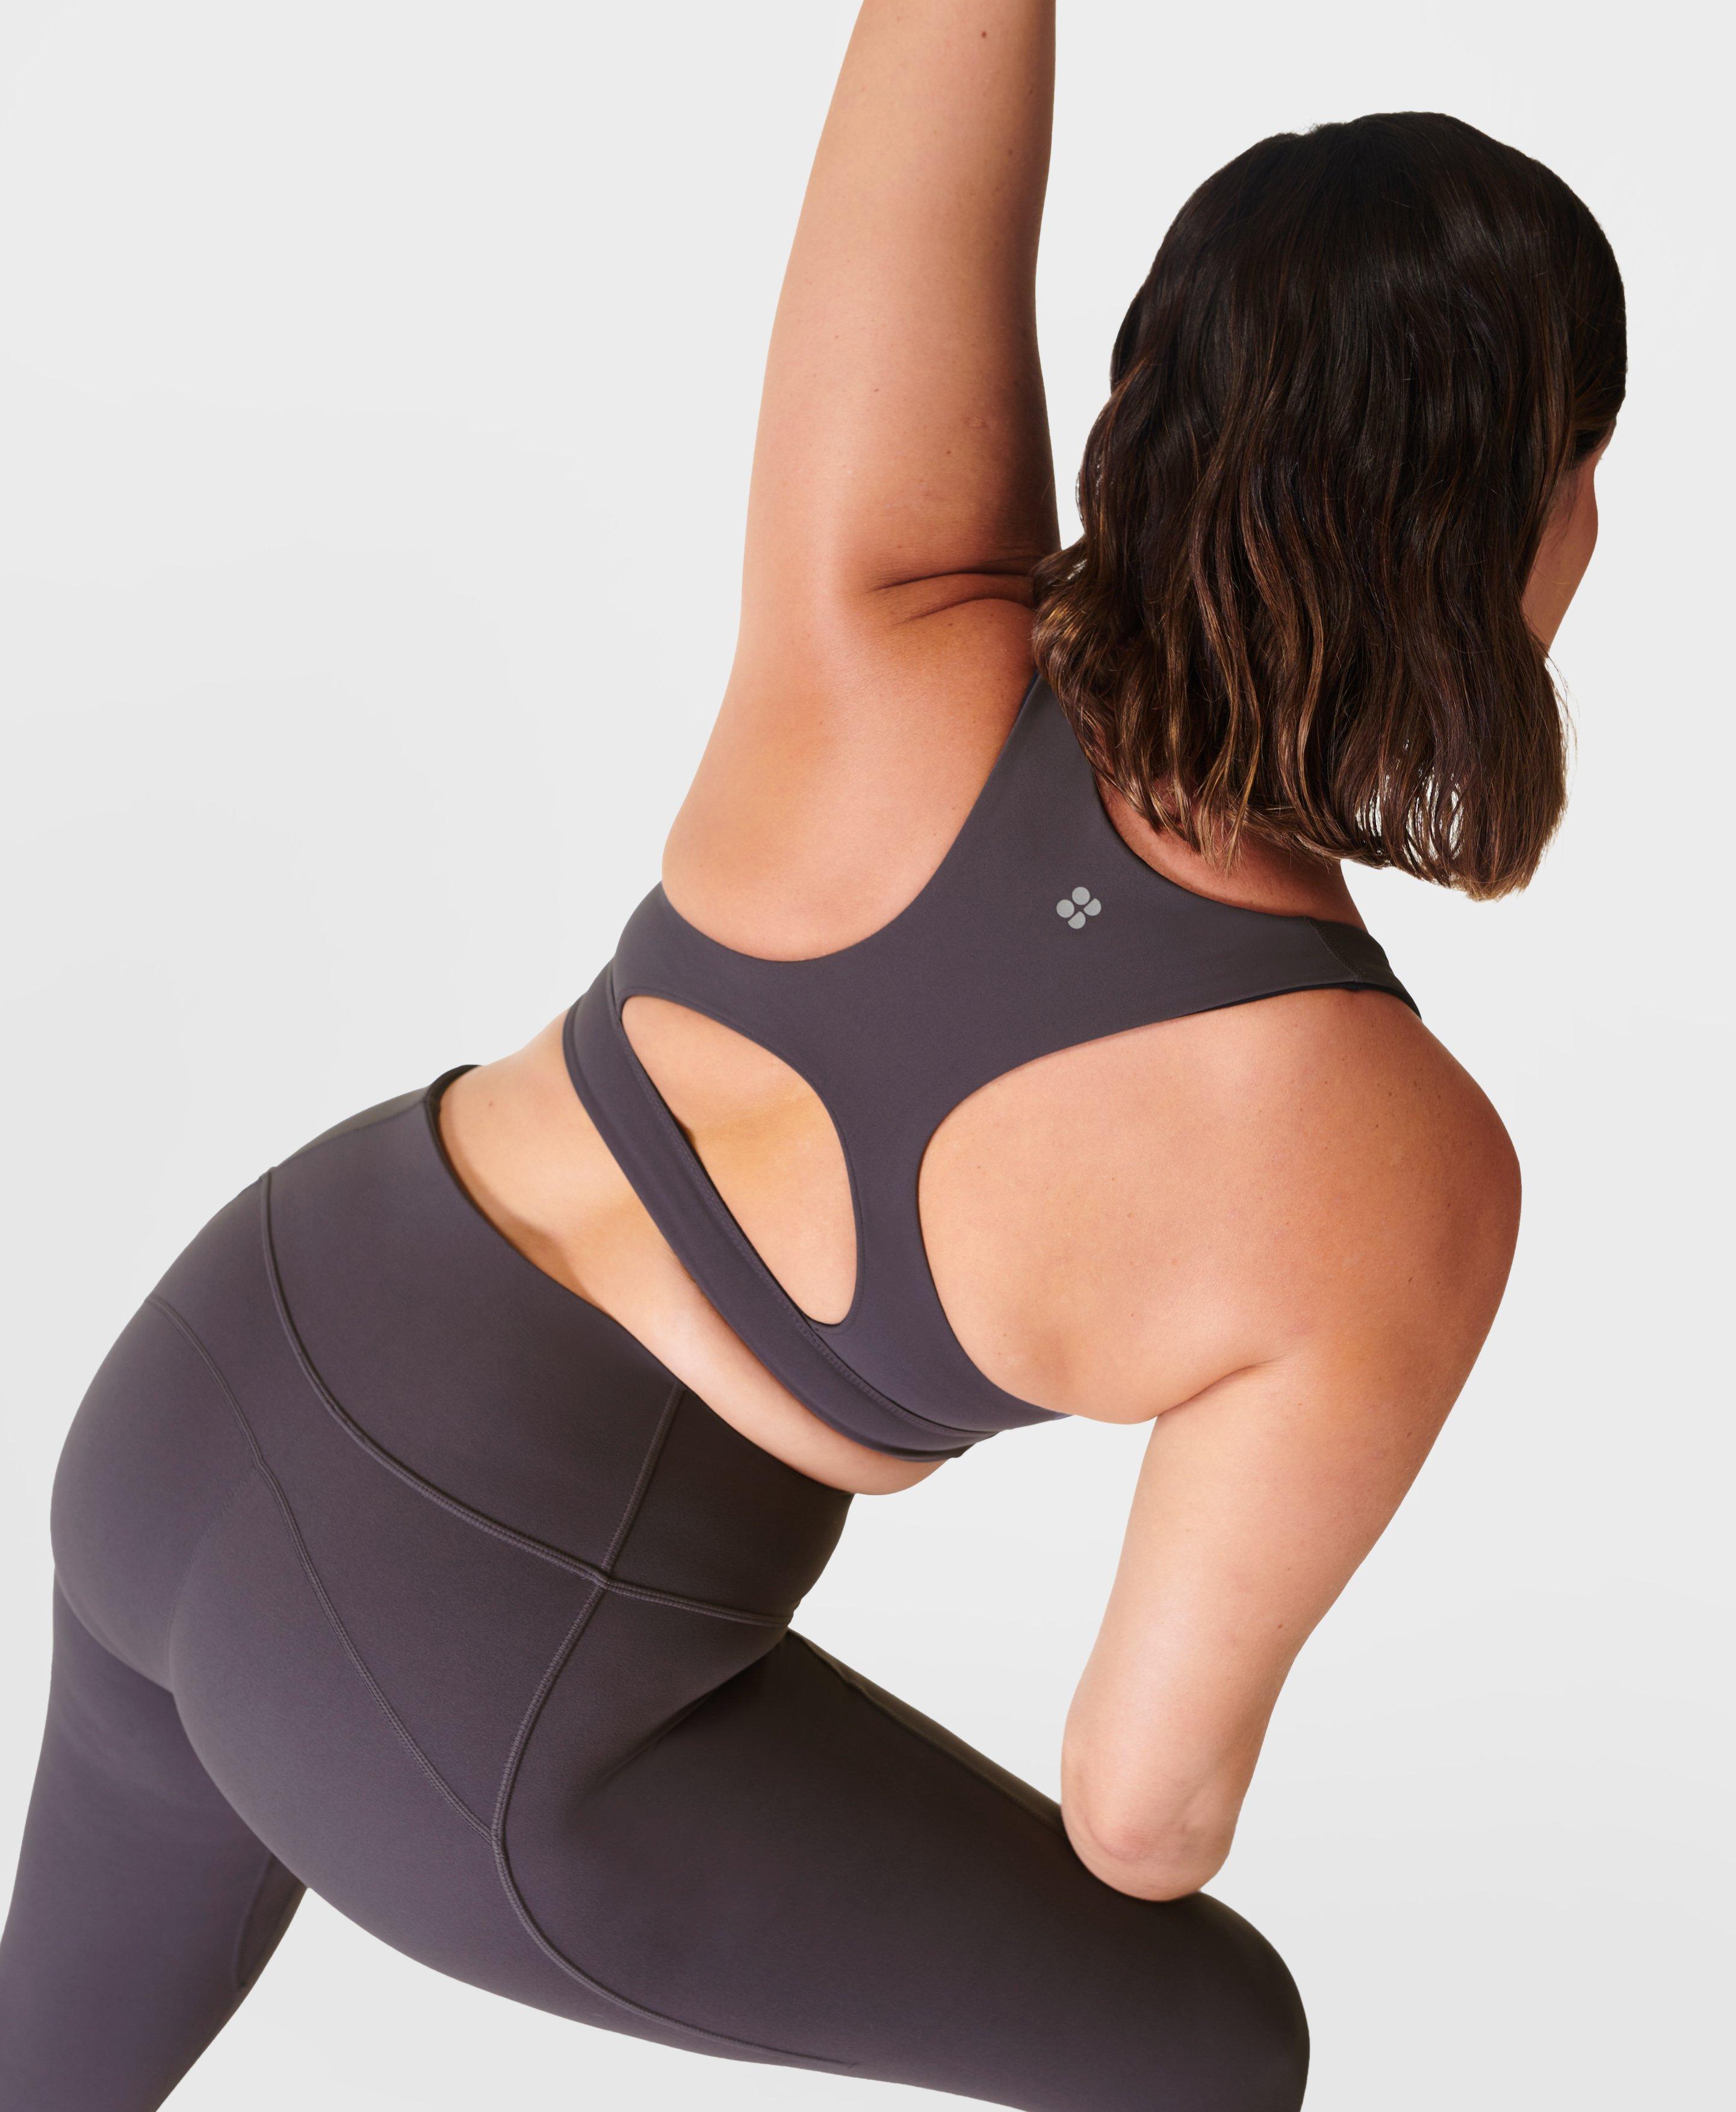 These Supportive Bras and Soft Leggings Are Up to 87% Off